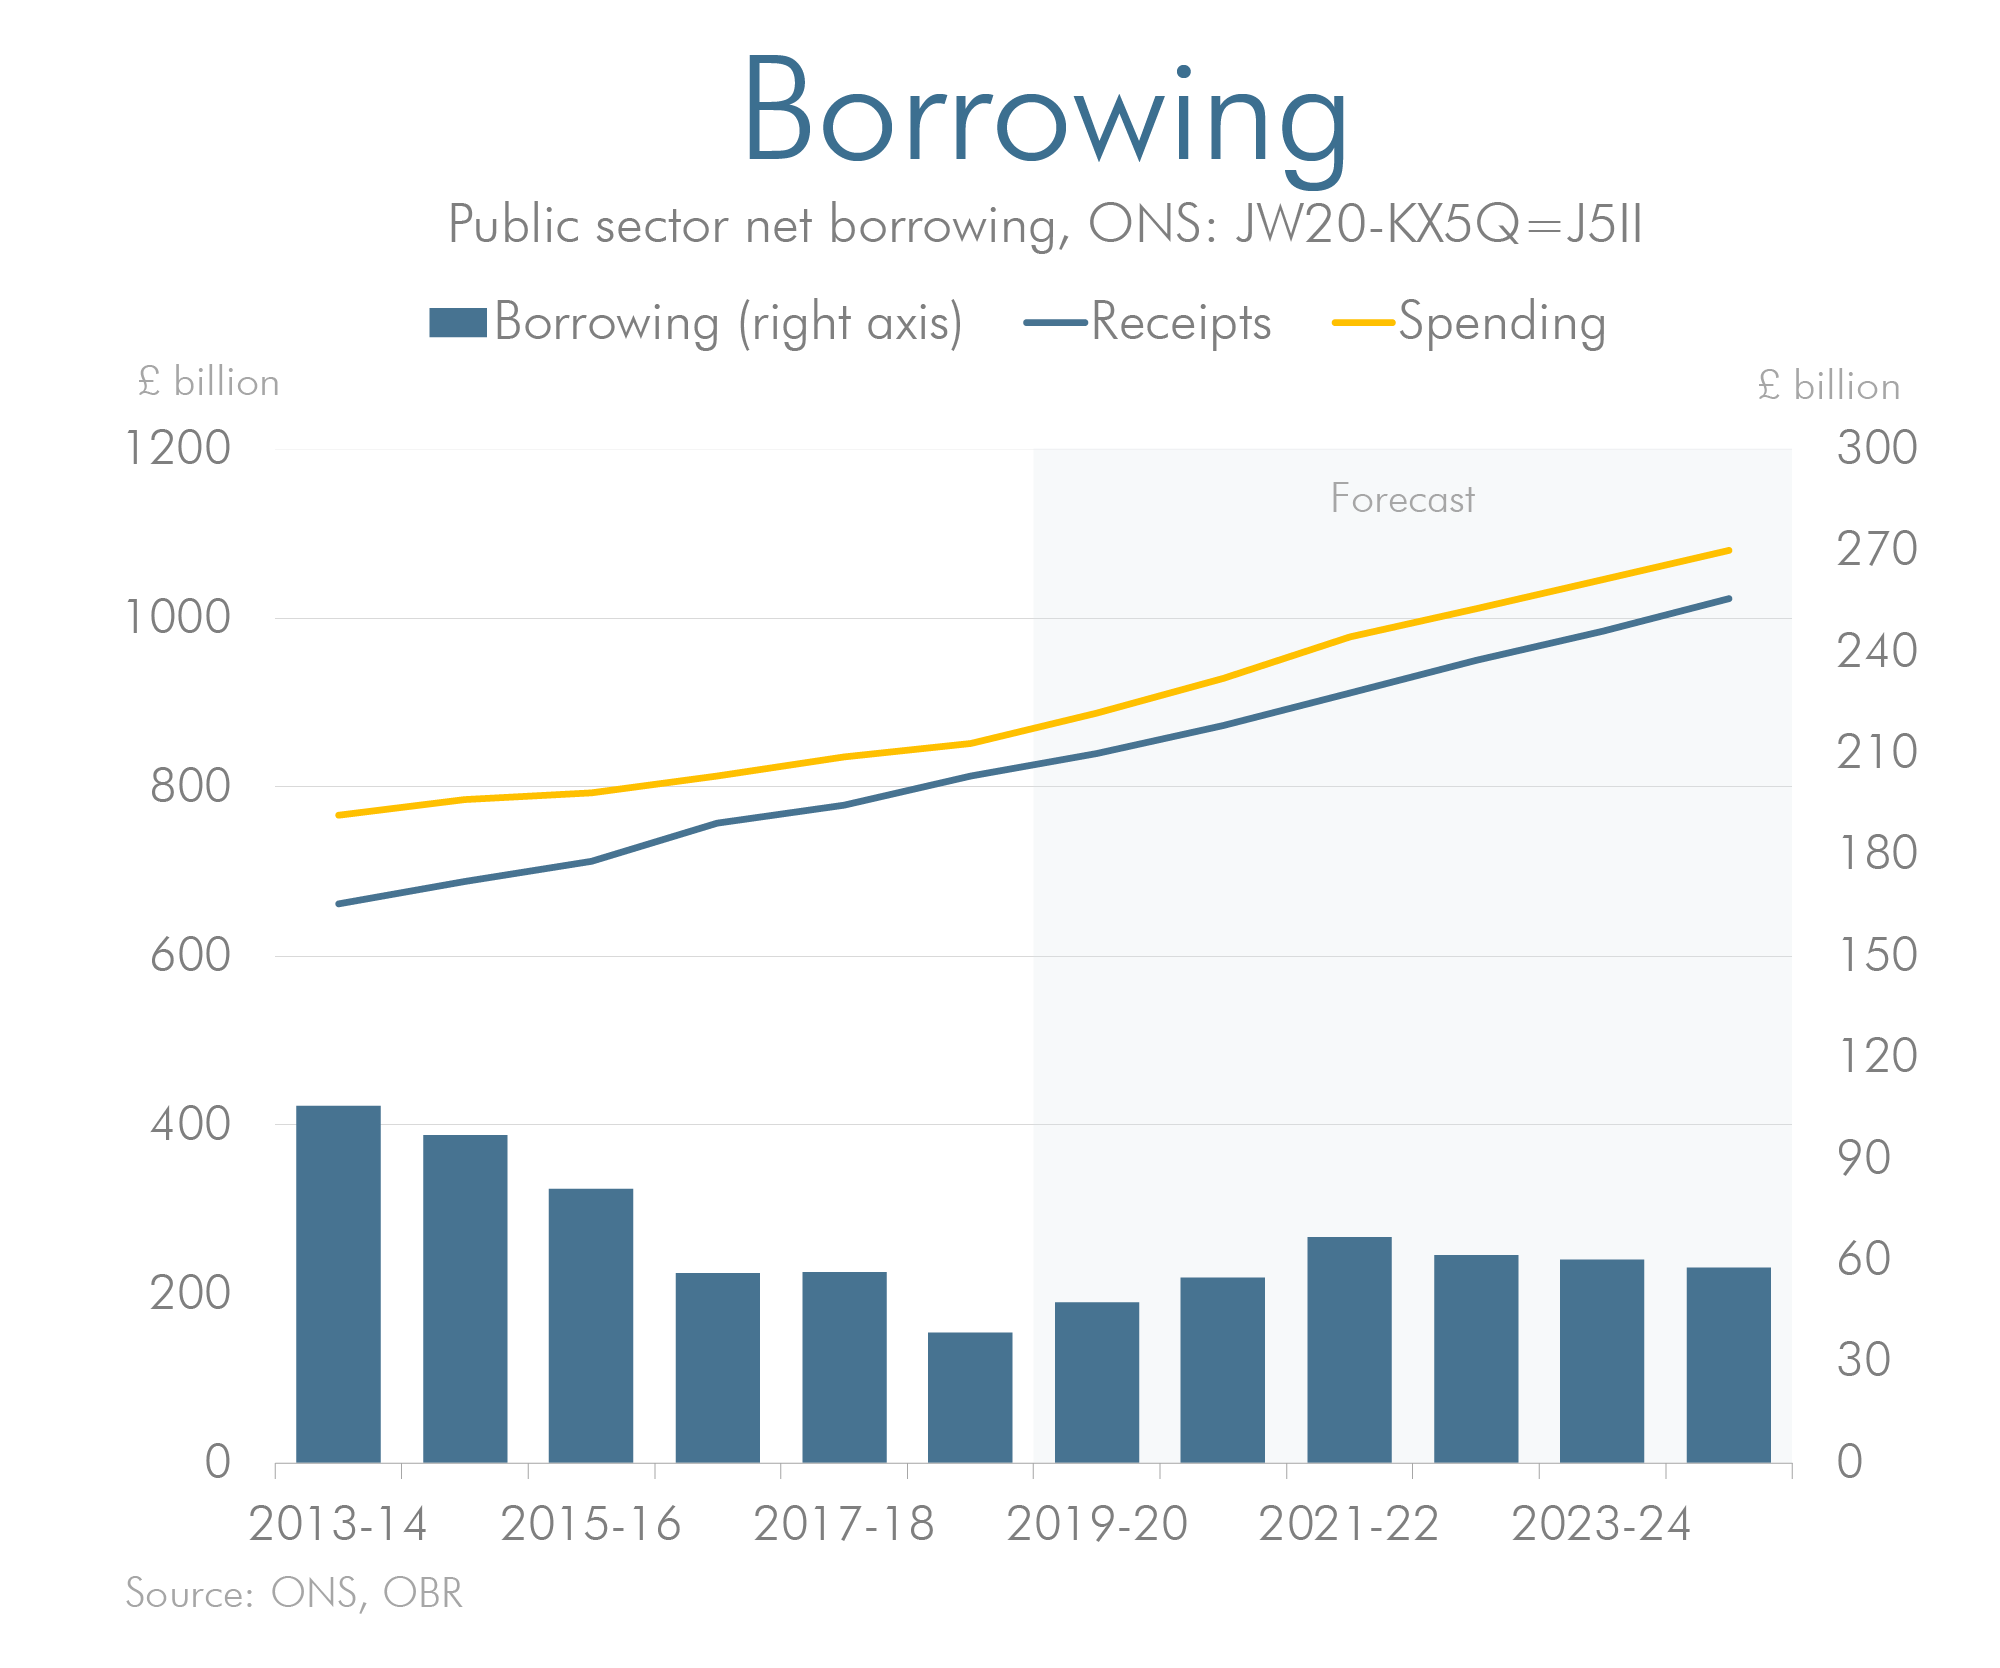 Latest forecast versus previous forecast for borrowing